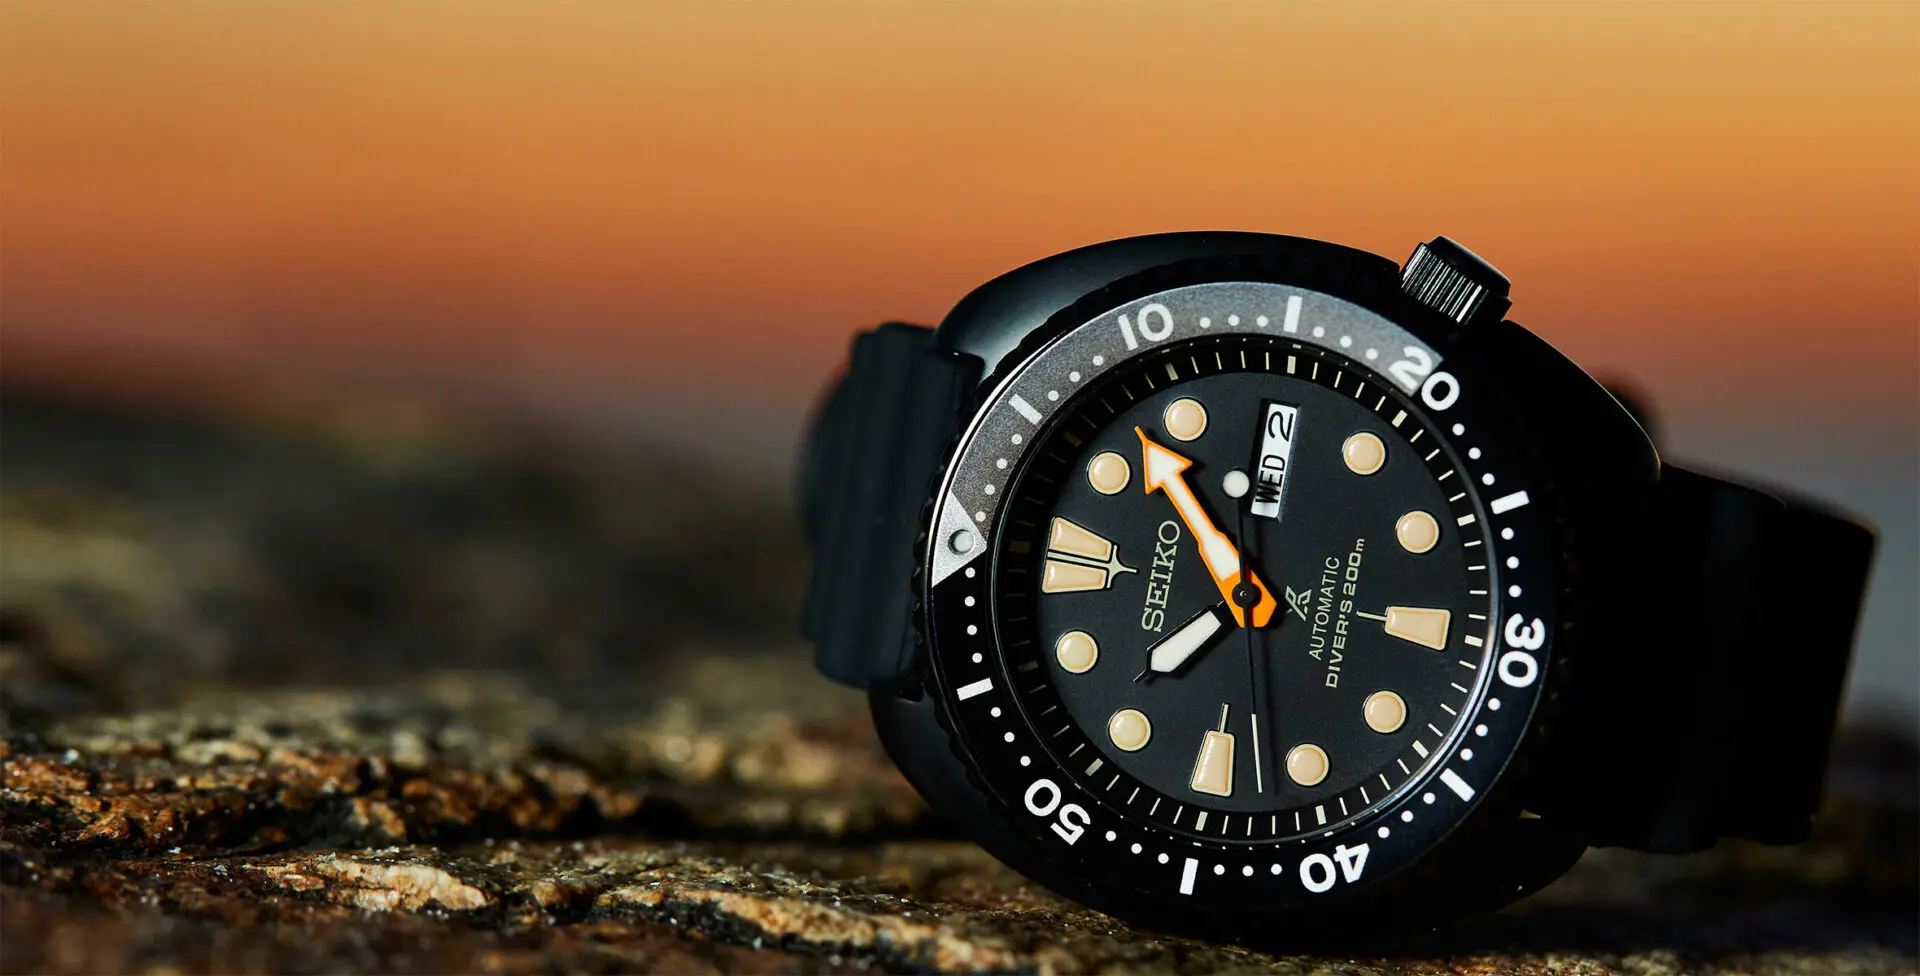 Seiko Prospex SRPC49K: Blacked-out Beauty – Video Review